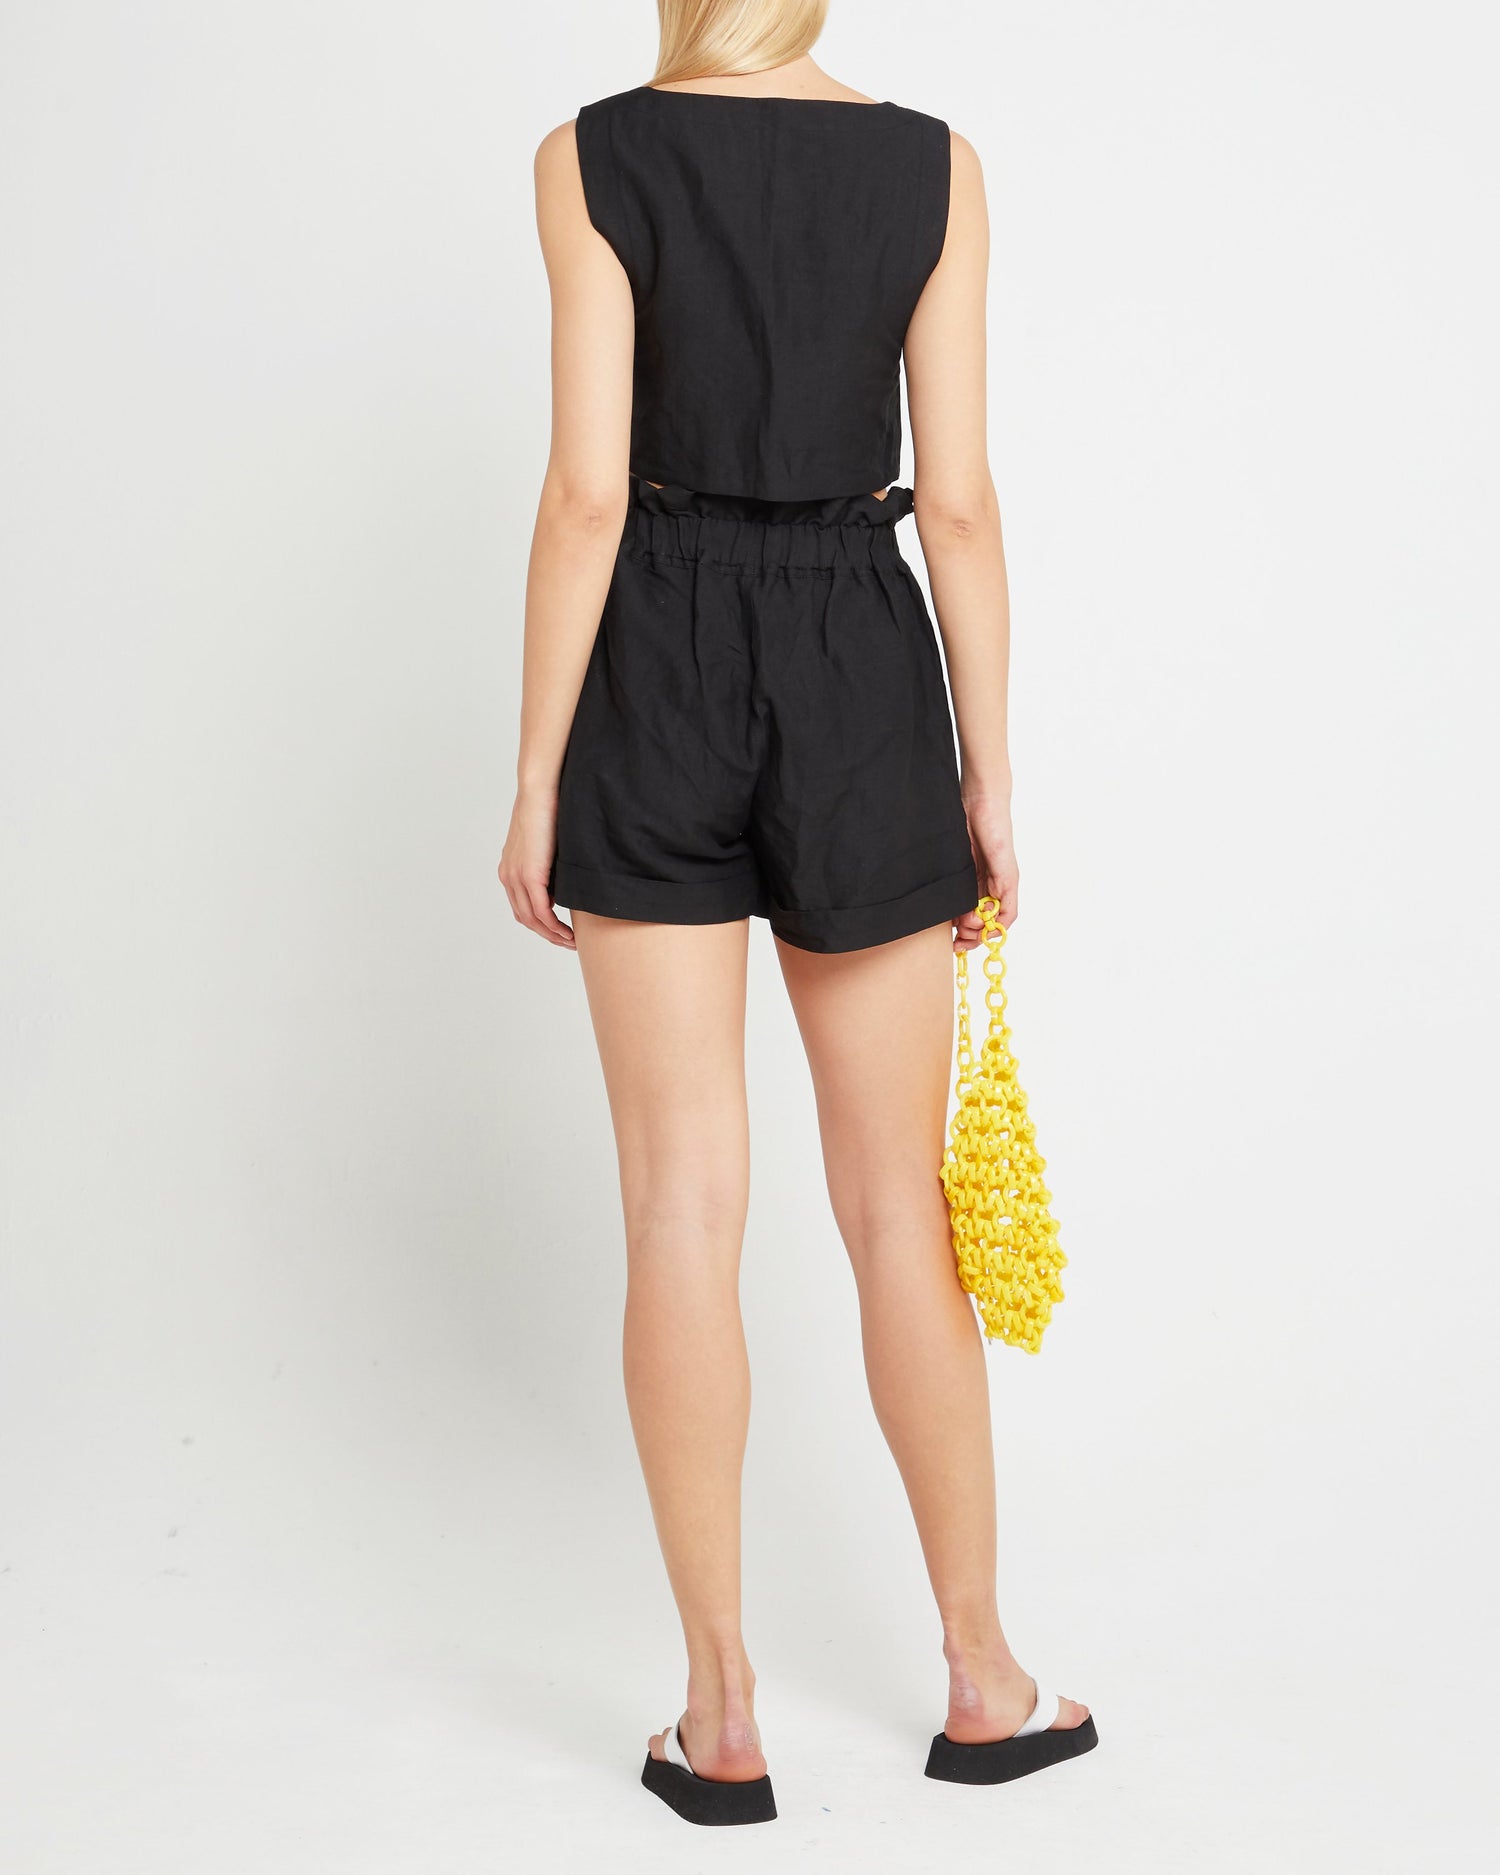 Fifth image of Vienna Set, a black top and shorts, linen, elastic, square neckline, pockets, tank